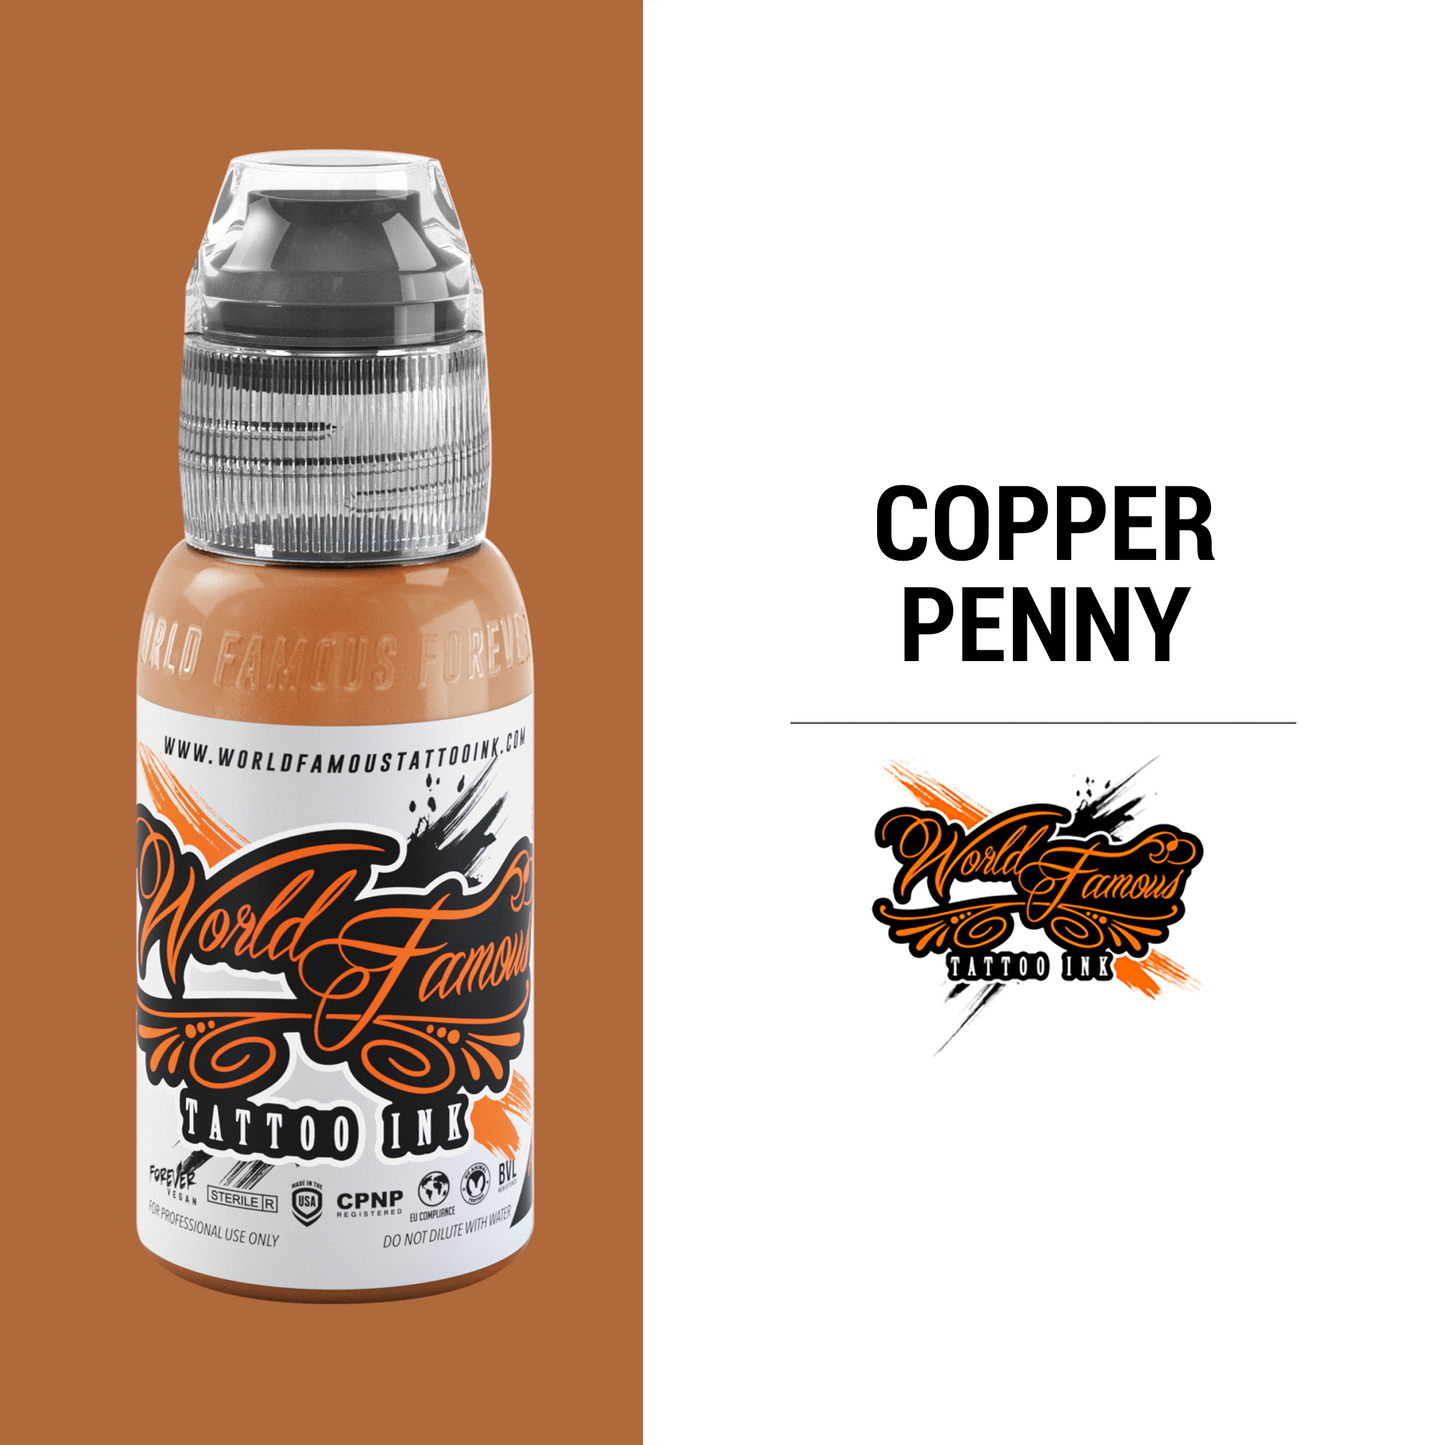 Copper Penny | World Famous Tattoo Ink